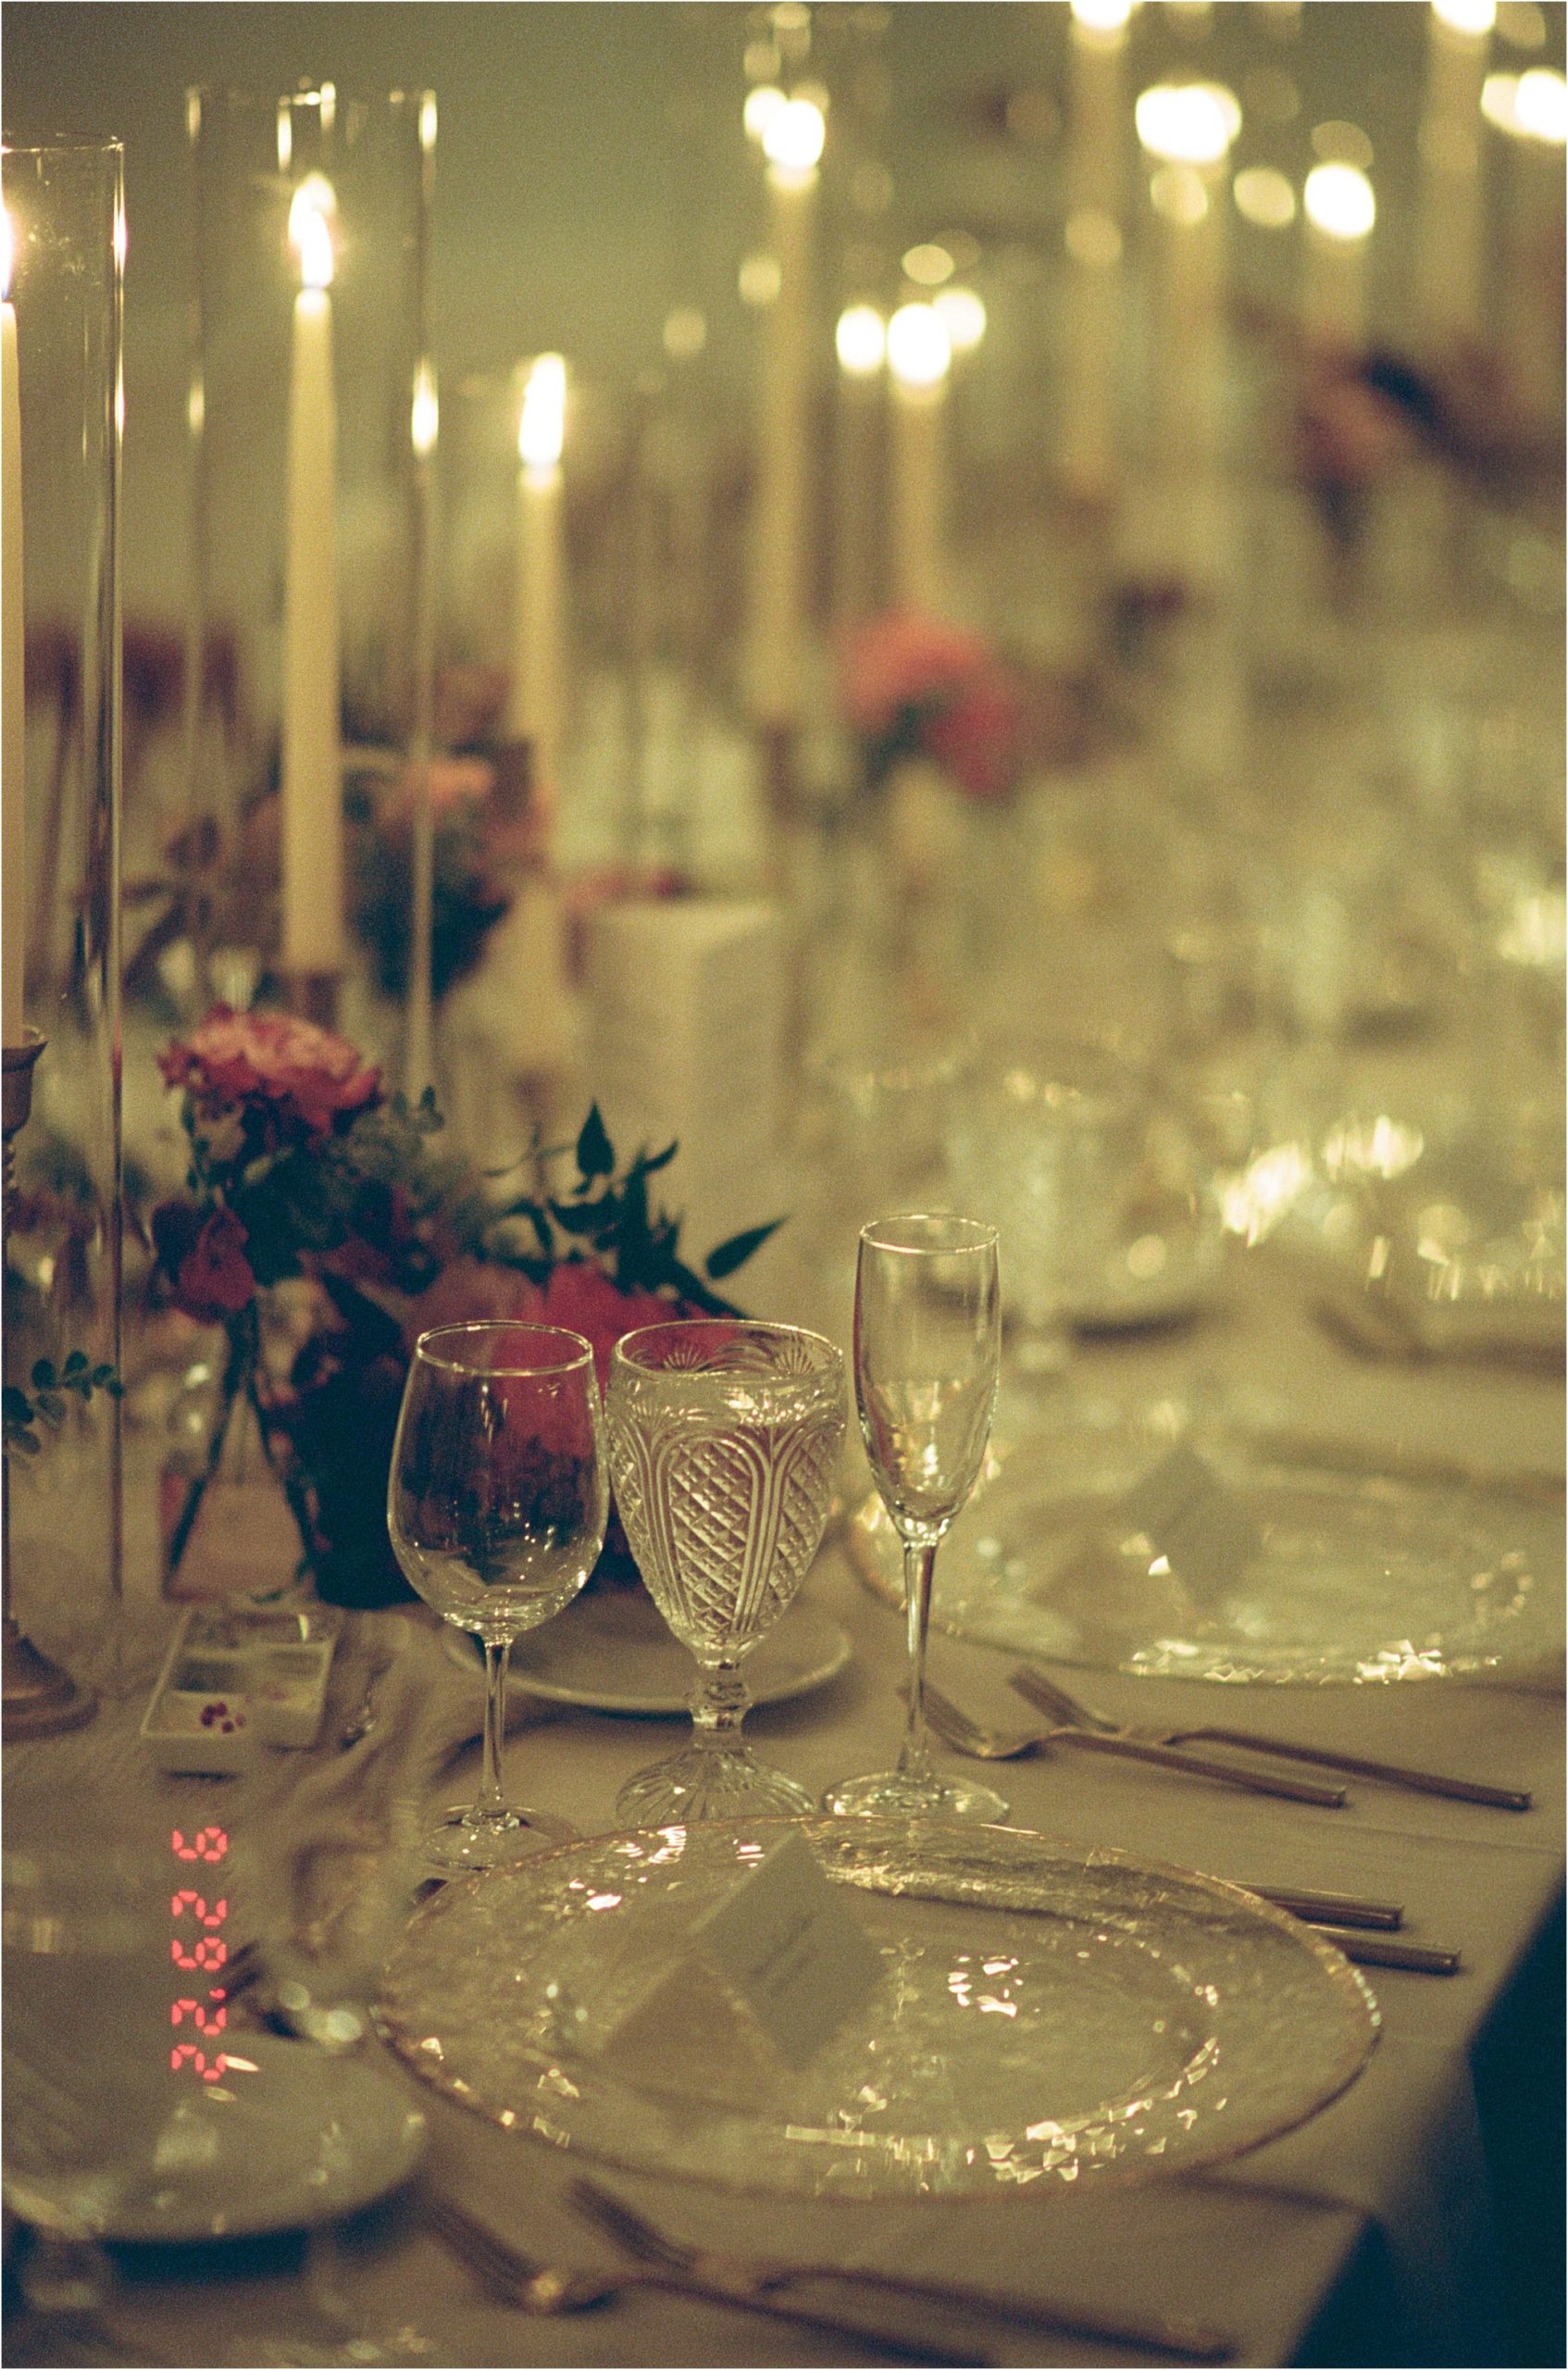 A film wedding photo shows glassware and florals set for a candlelit wedding reception.